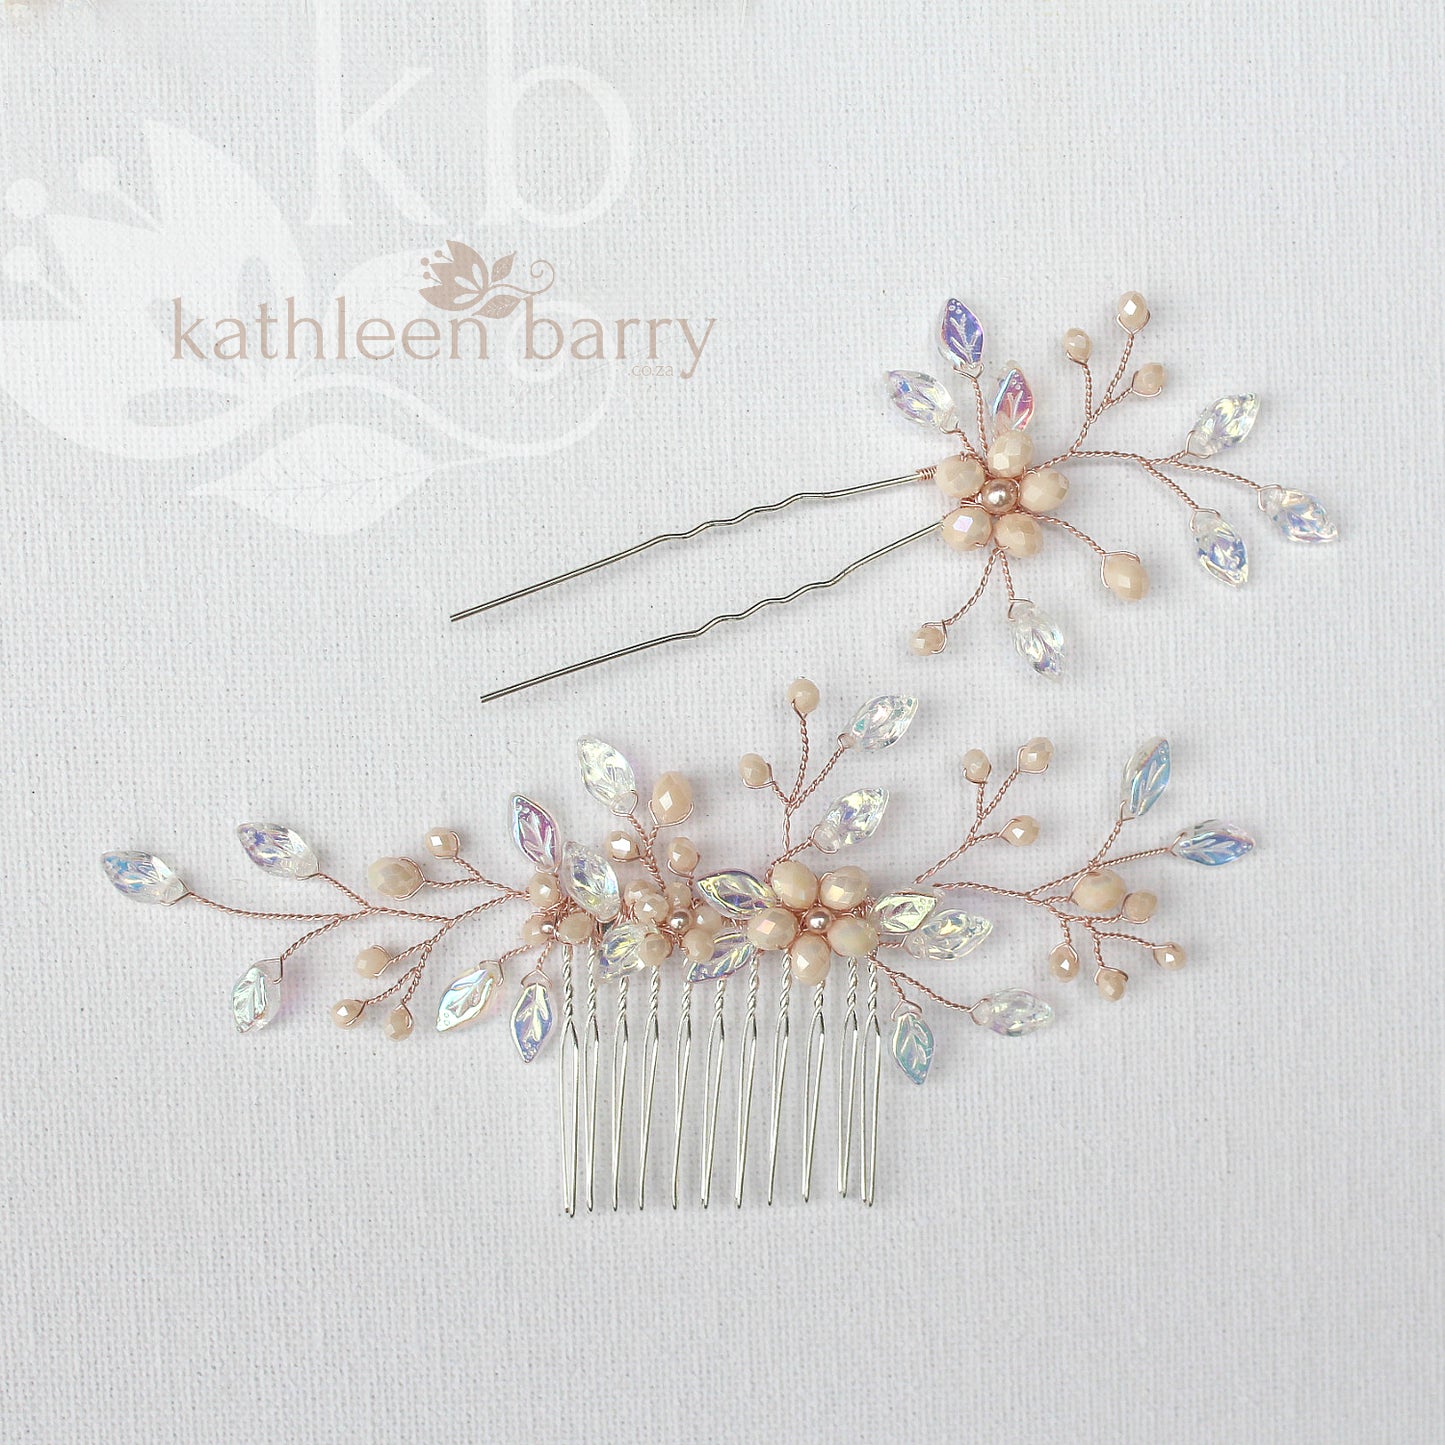 Quinn hair pin - color & metallic options available